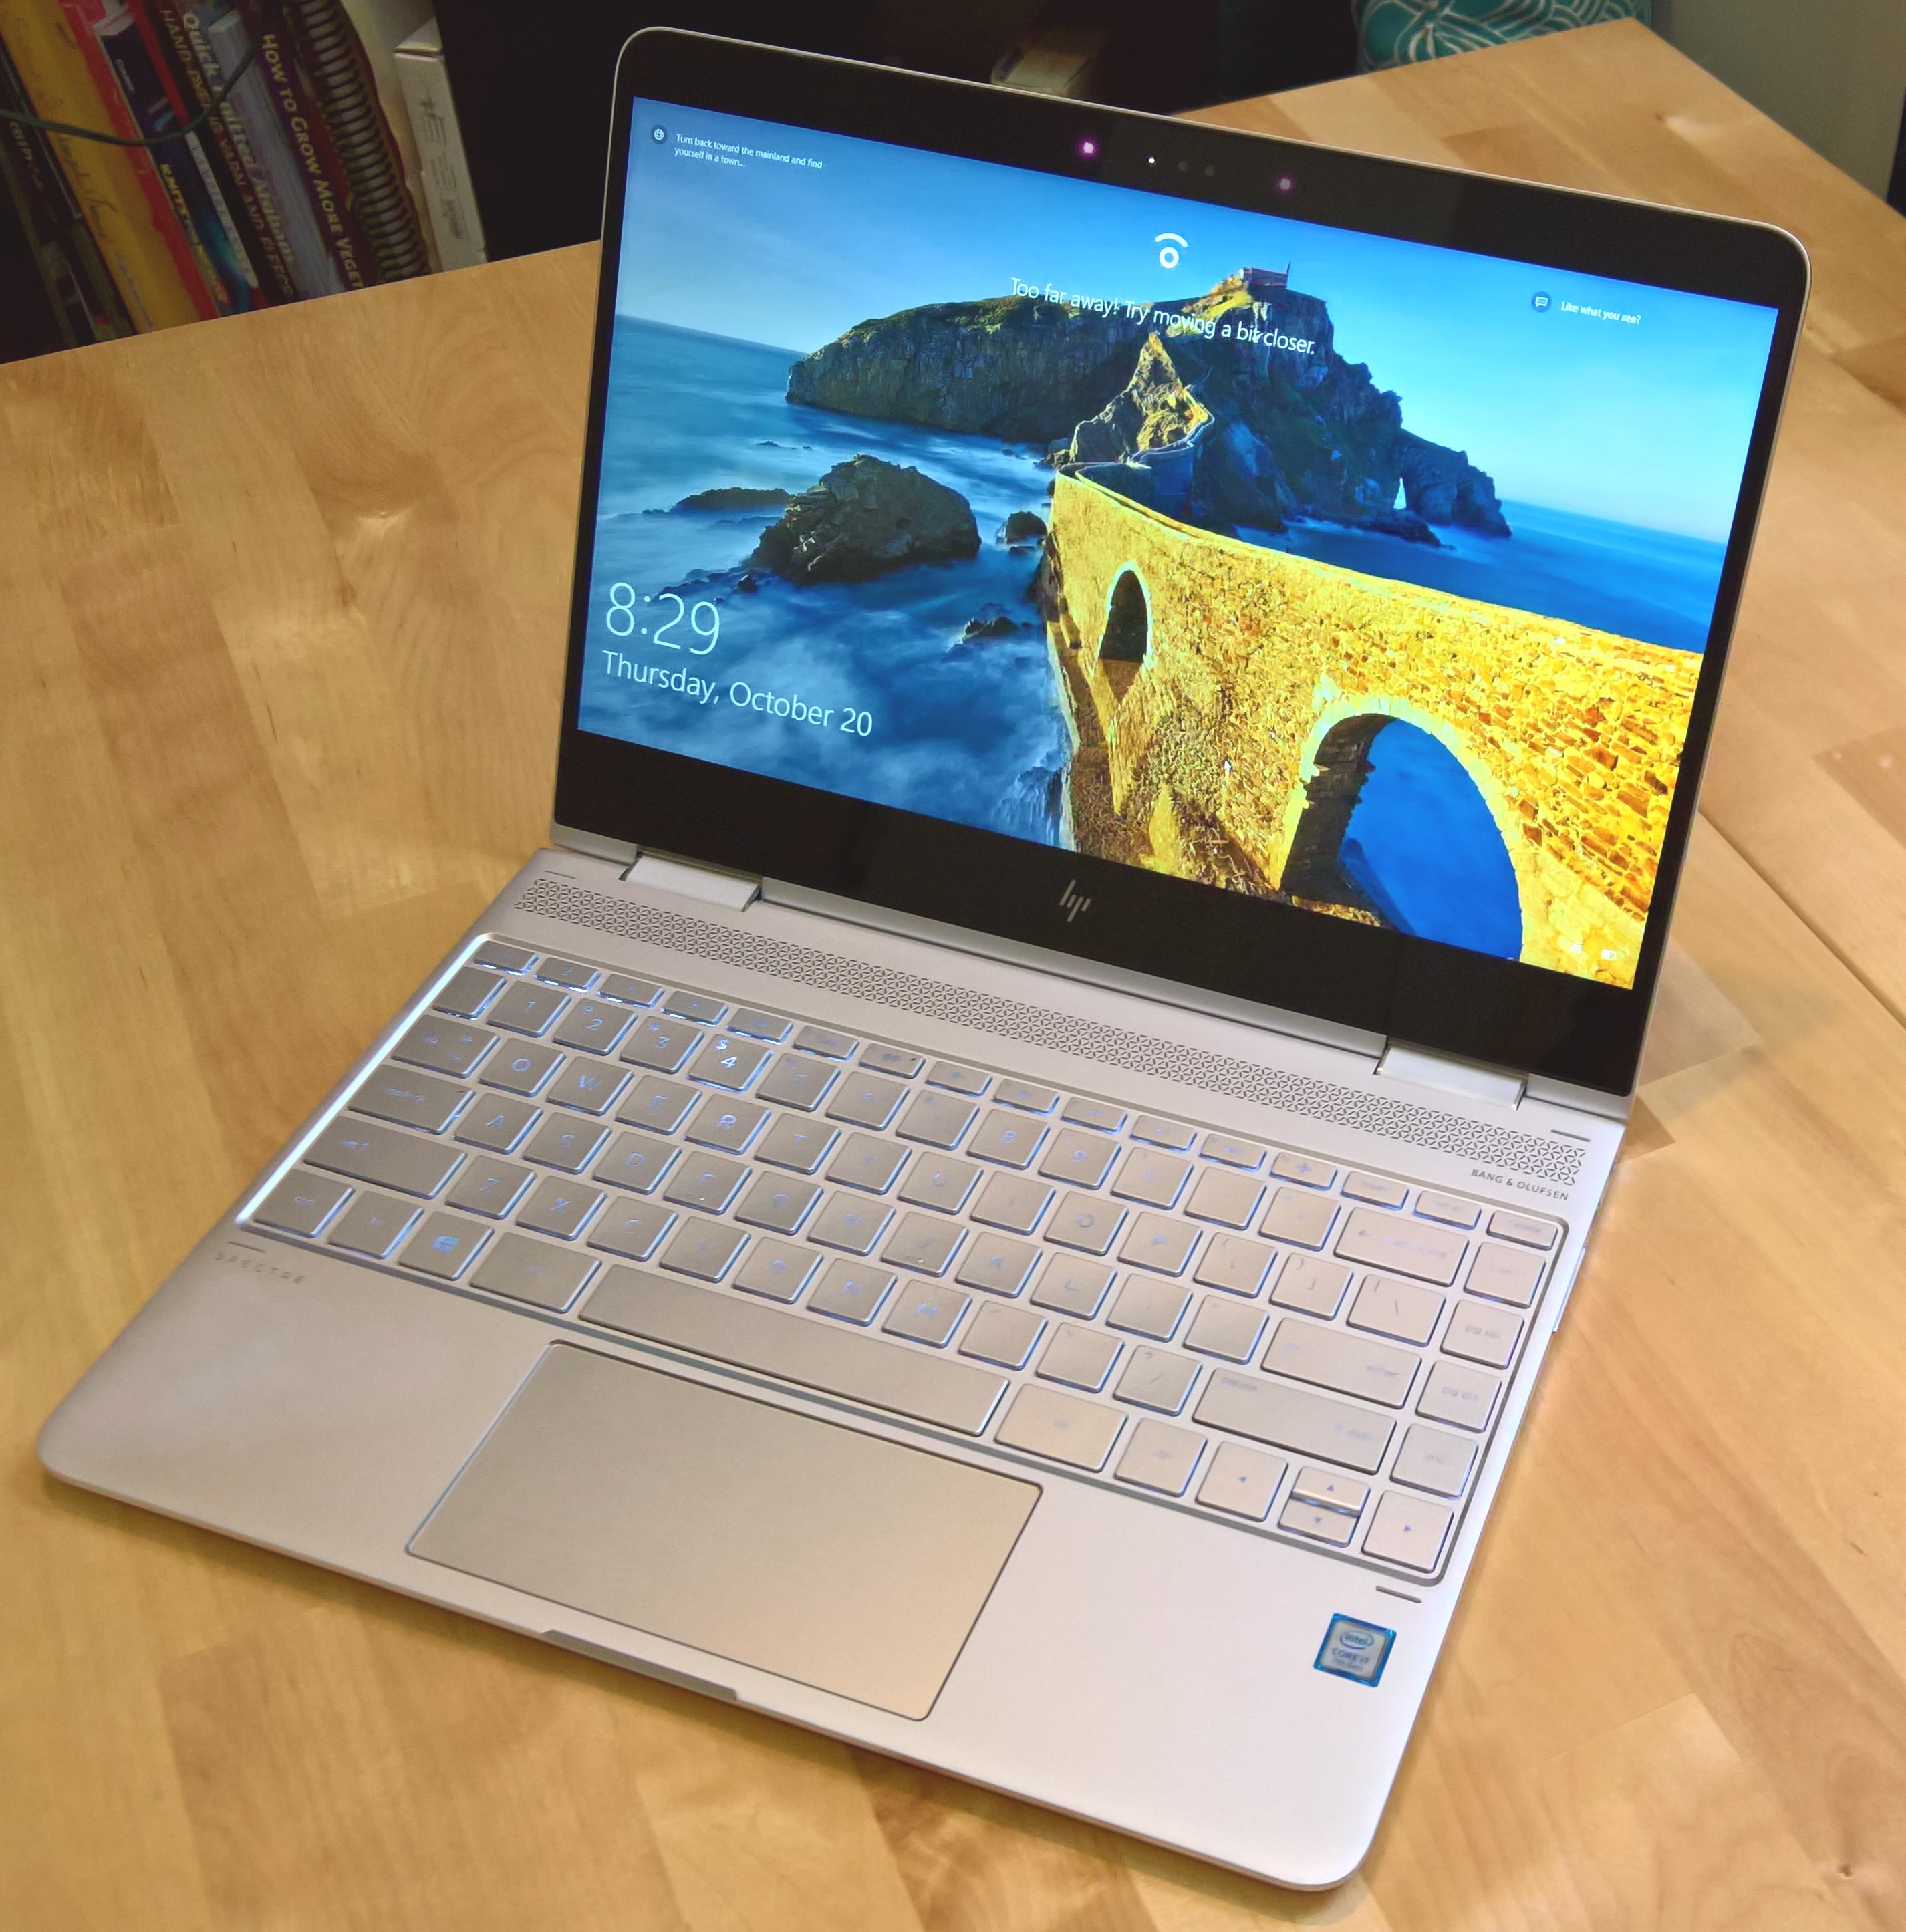 HP’s new Spectre x360 13 reviewed Probably the best PC laptop around